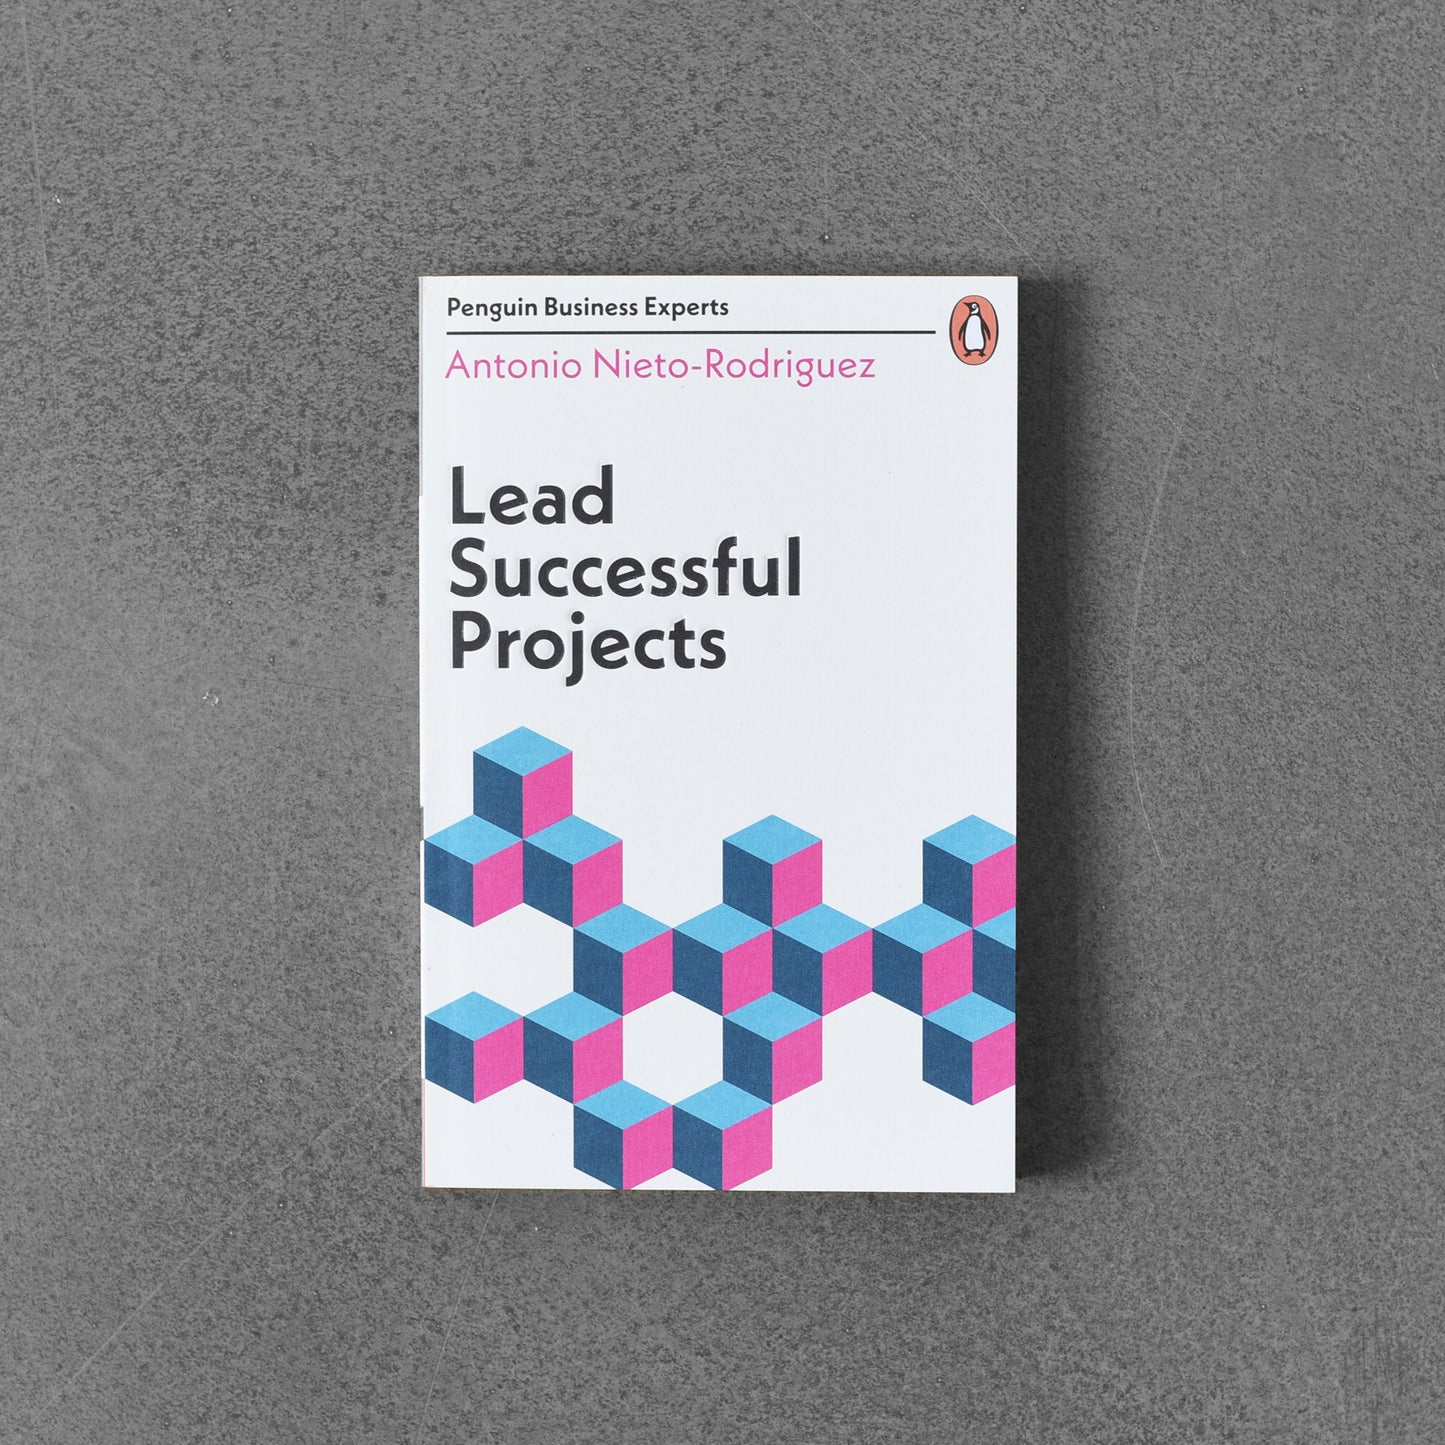 Lead Successful Projects